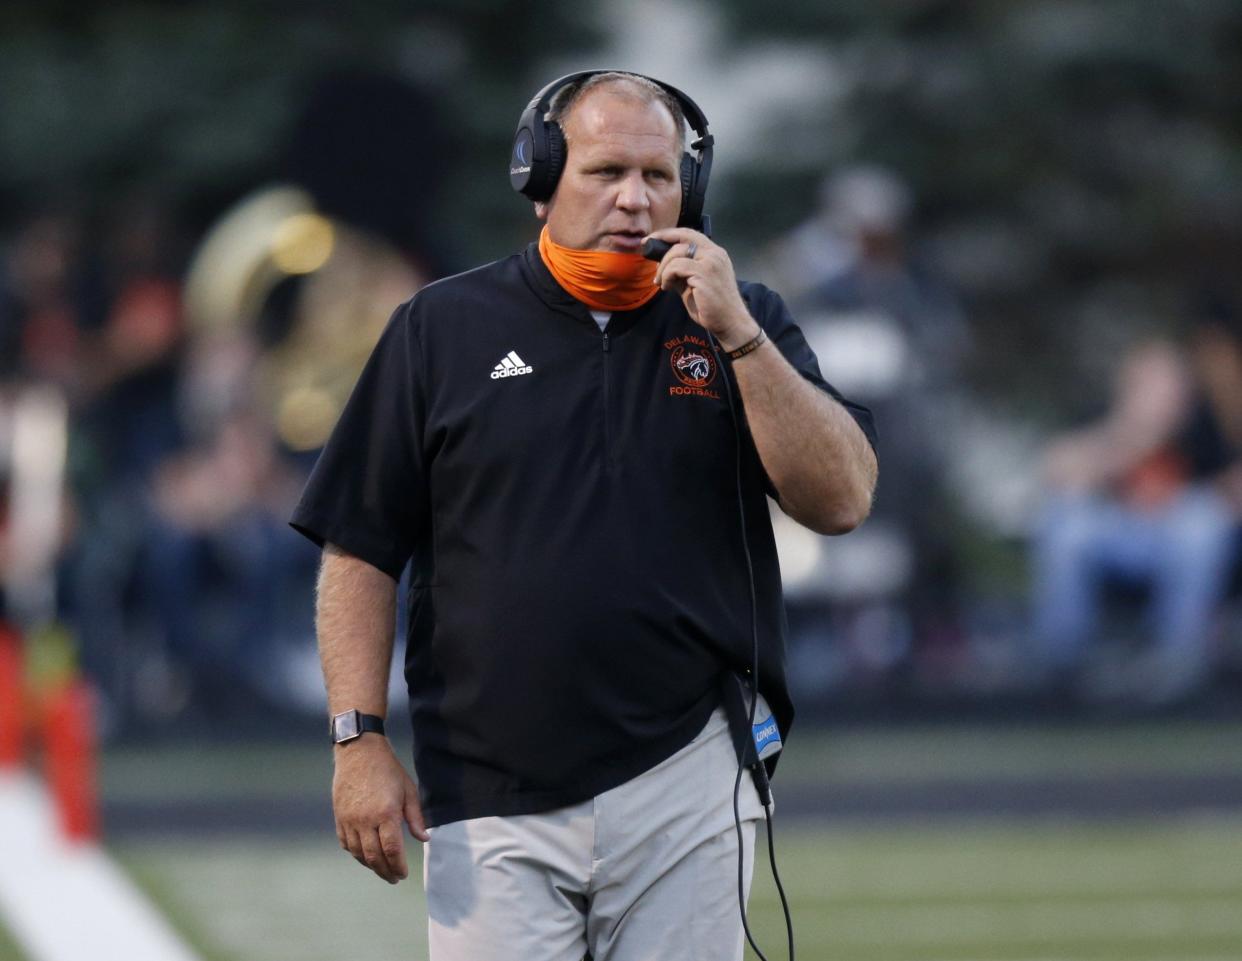 Scott Wetzel has resigned after four seasons as Delaware Hayes football coach. He guided Big Walnut to the Division III state title in 2007 and also previously coached at Buckeye Valley and Westerville North.